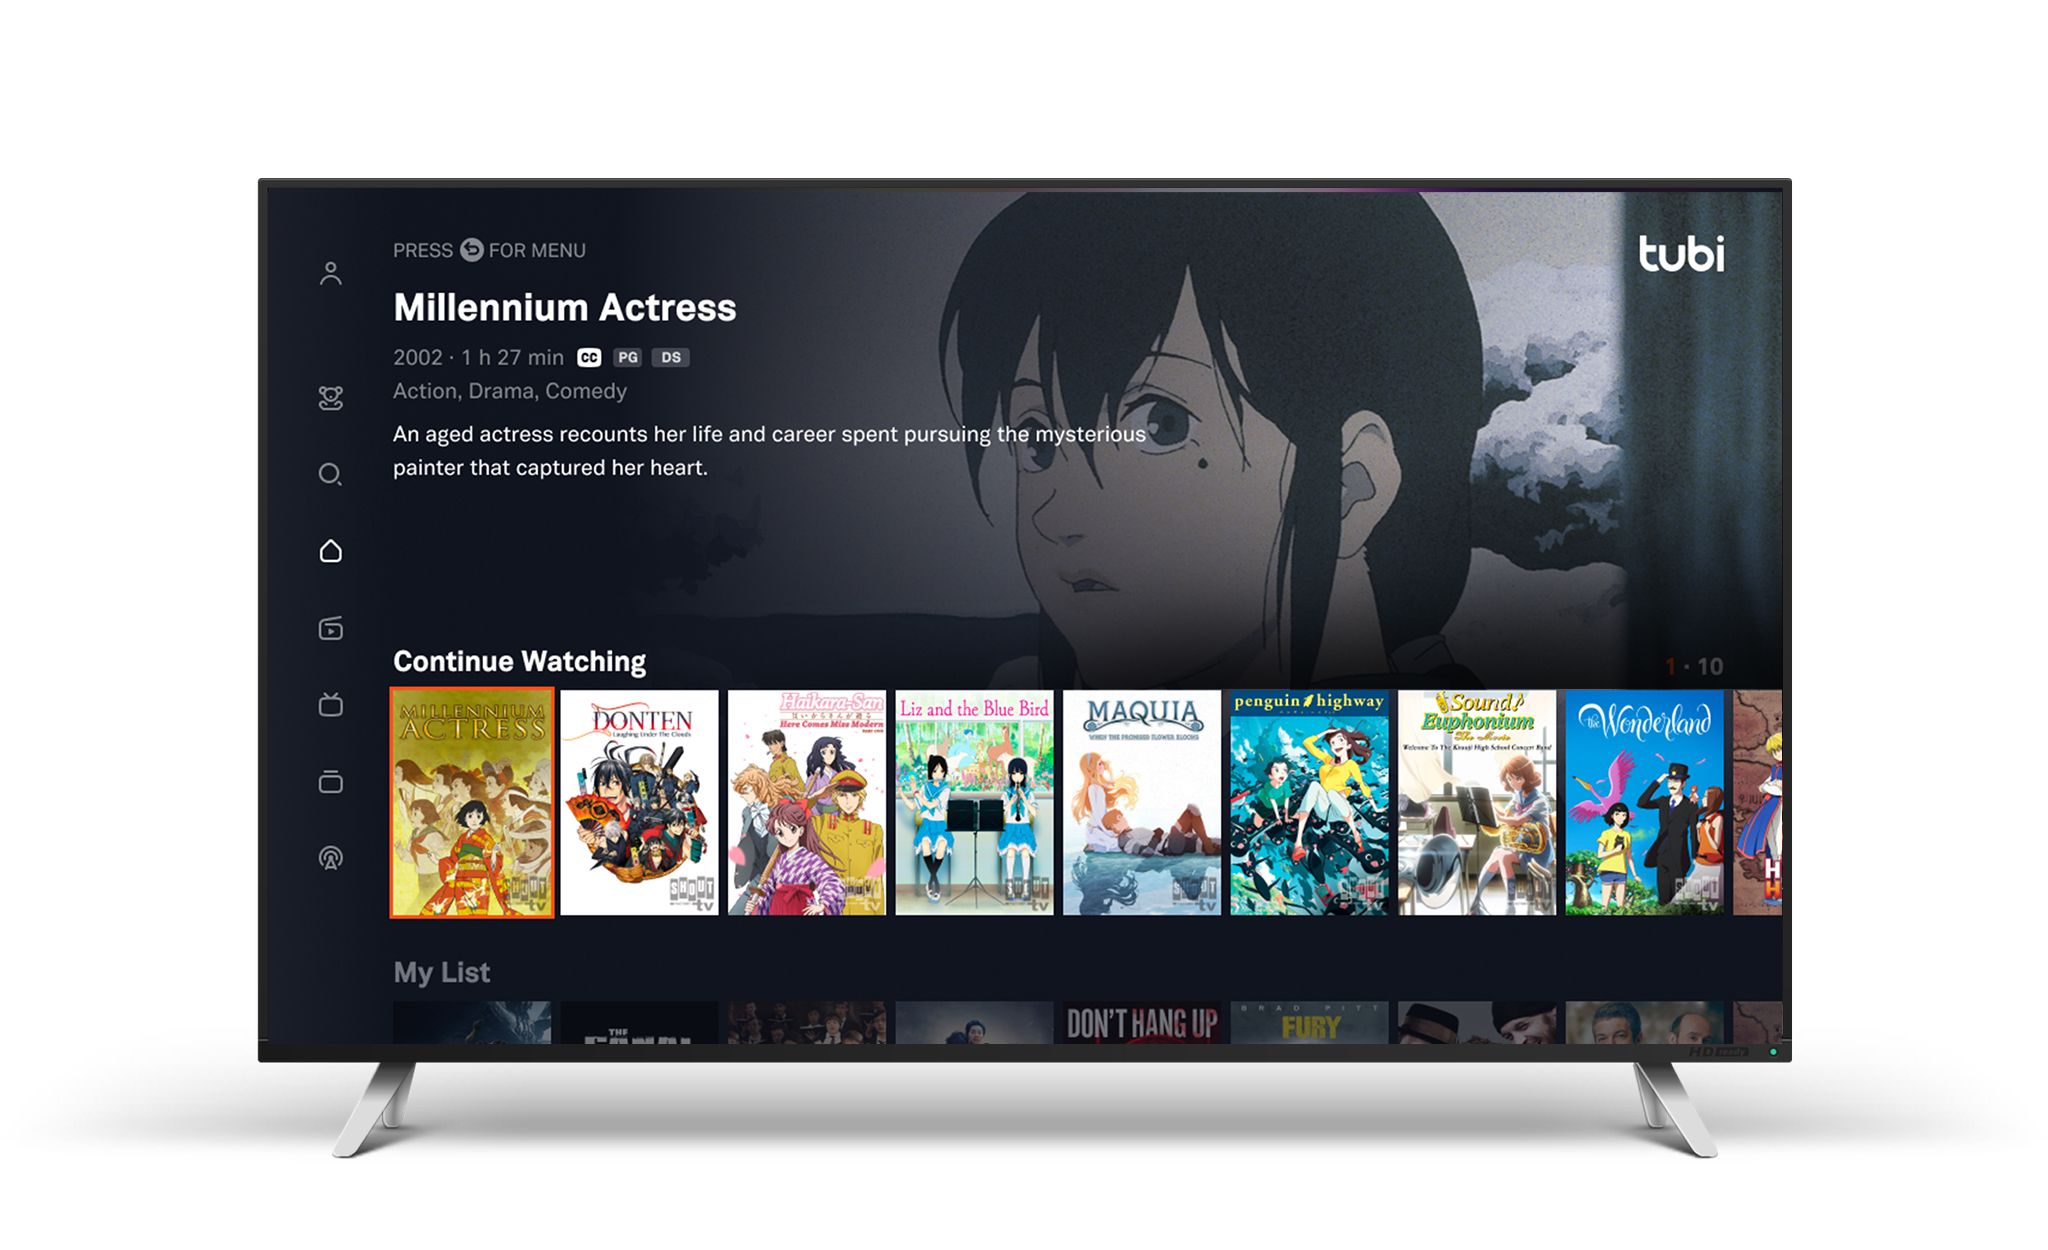 Tubi is Adding New Premium Anime Titles in Shout! Factory Content Deal